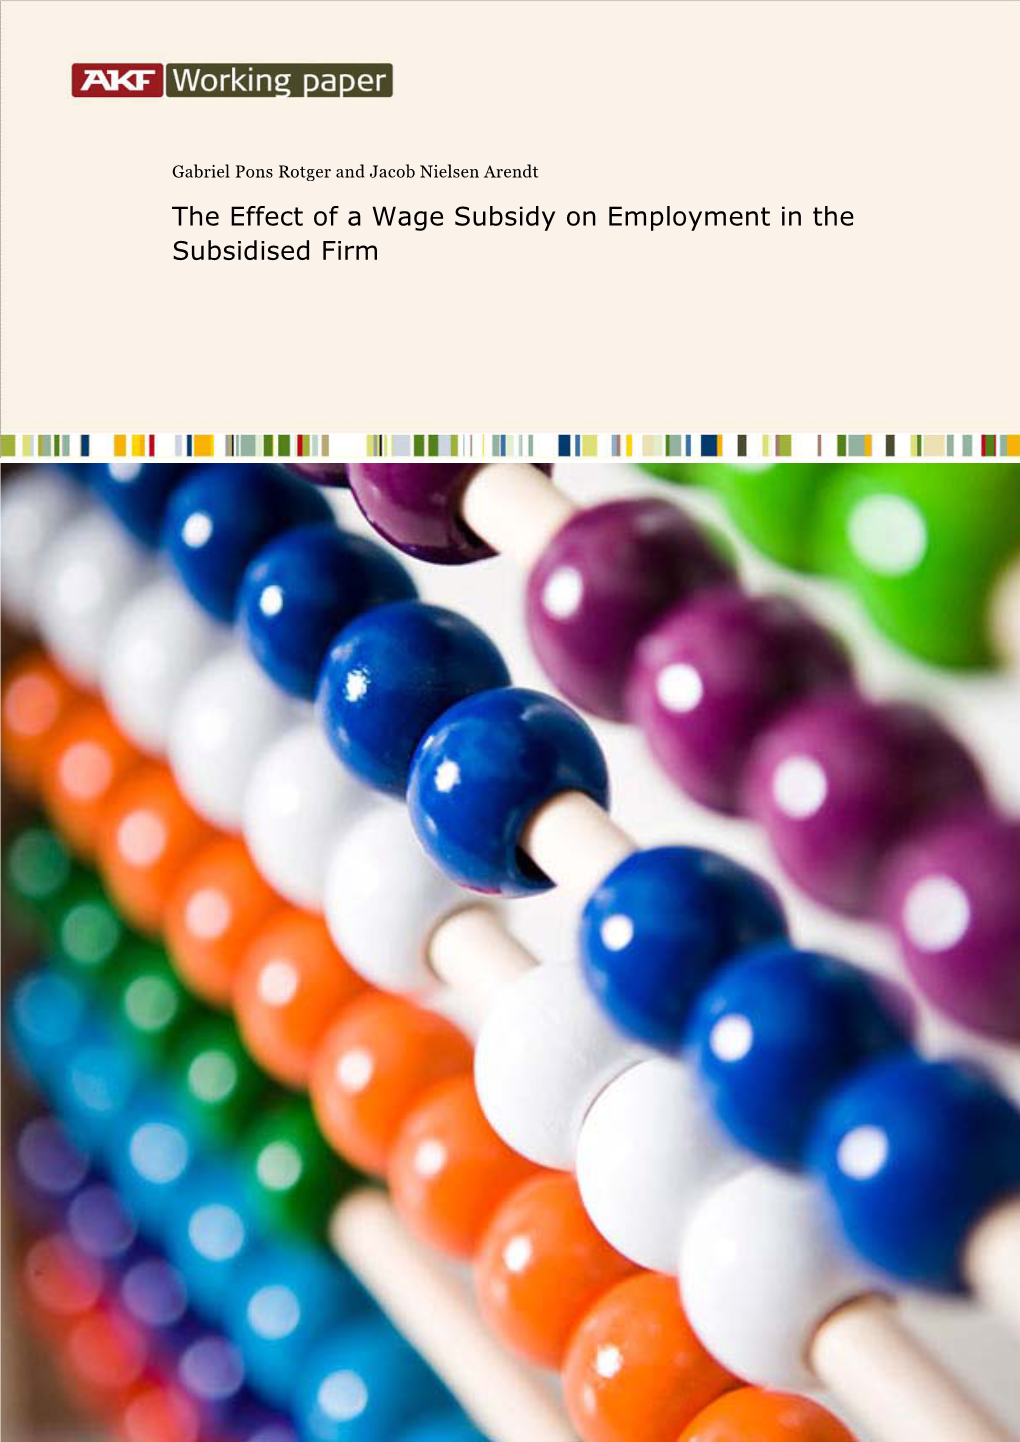 The Effect of a Wage Subsidy on Employment in the Subsidised Firm